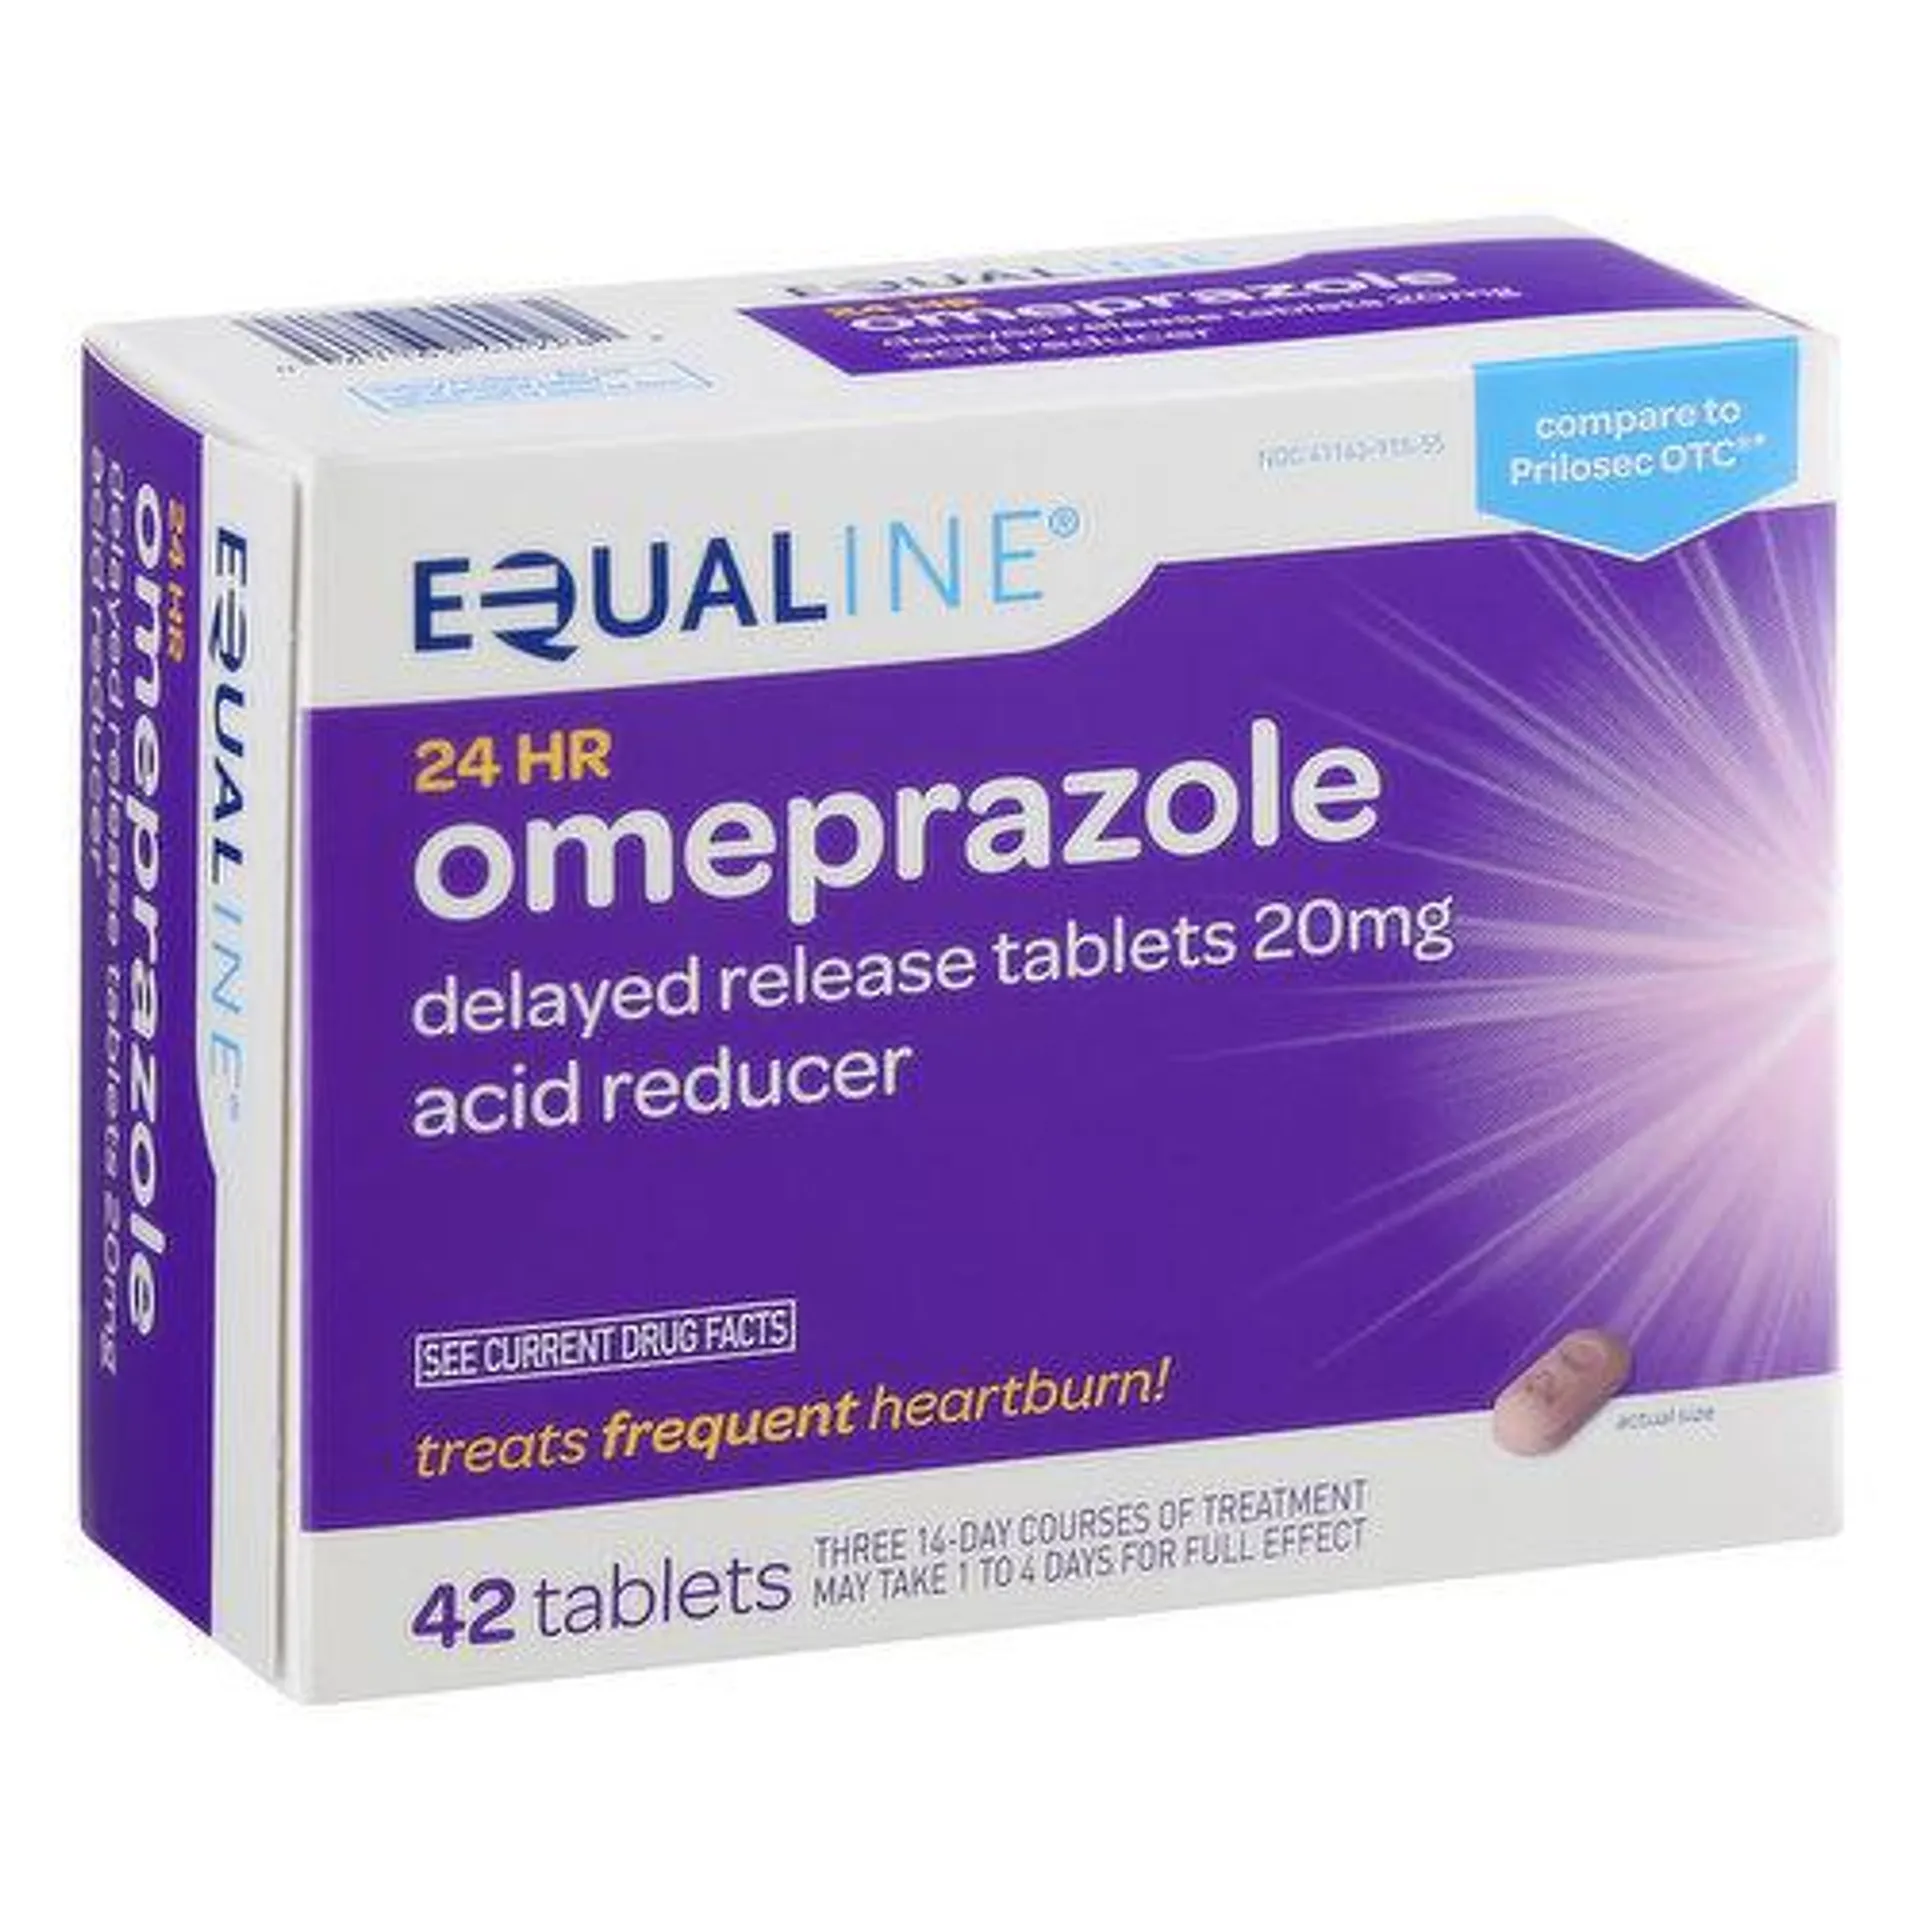 EQUALINE Omeprazole, 20 mg, 42 Delayed Release Tablets, 1 Each